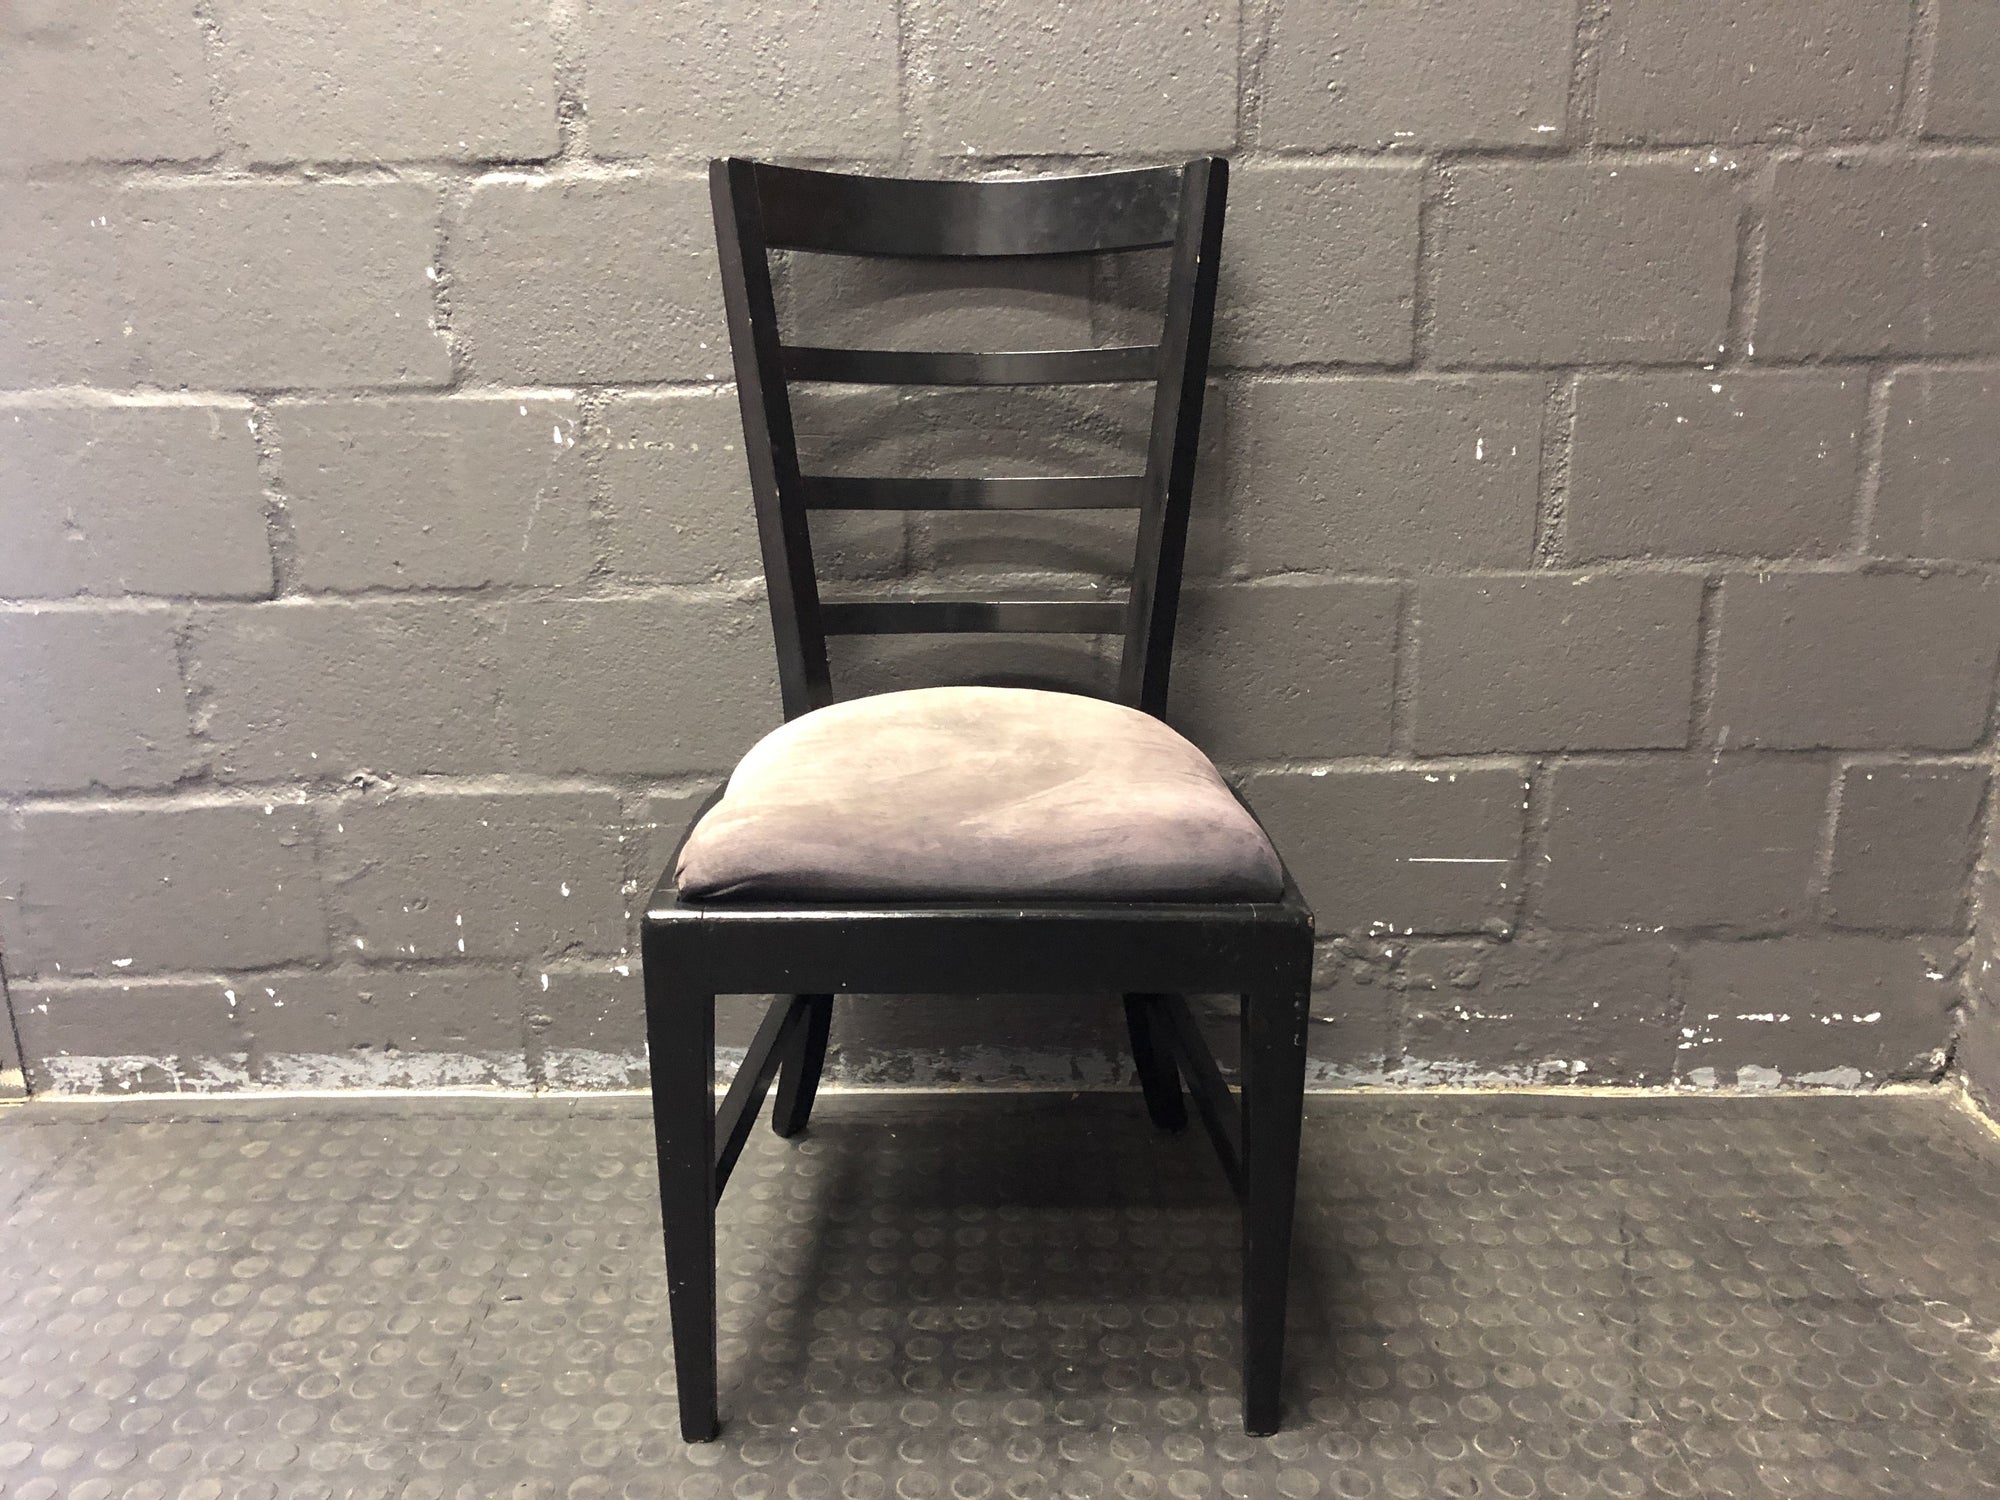 Misty Grey Cushioned Dining Chair